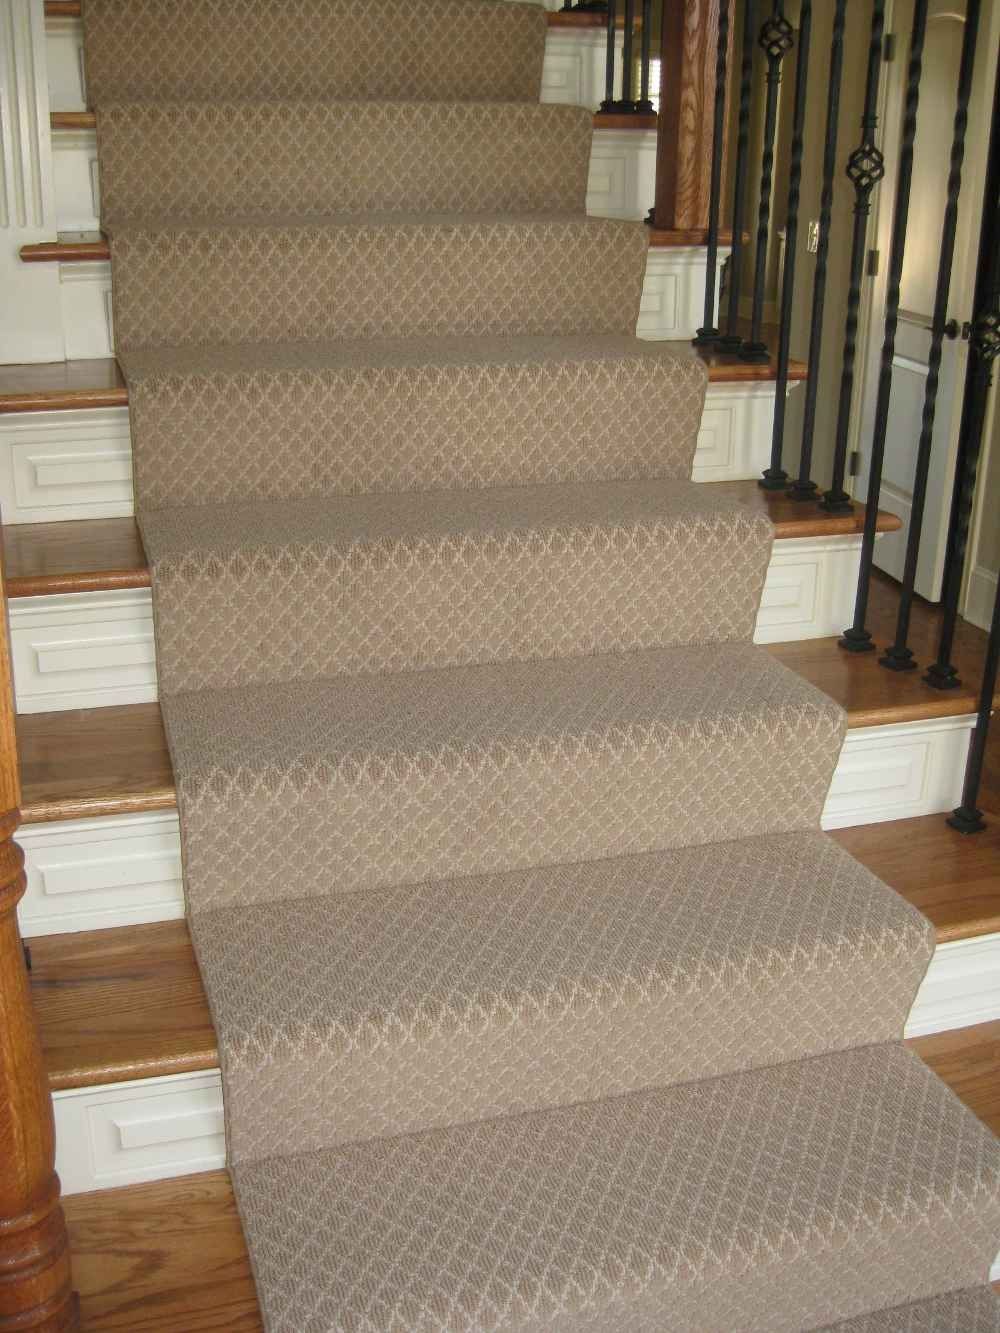 Keep Plastic Carpet Runners For Stairs Interior Home Design Within Stair Tread Carpet Runners (View 15 of 20)